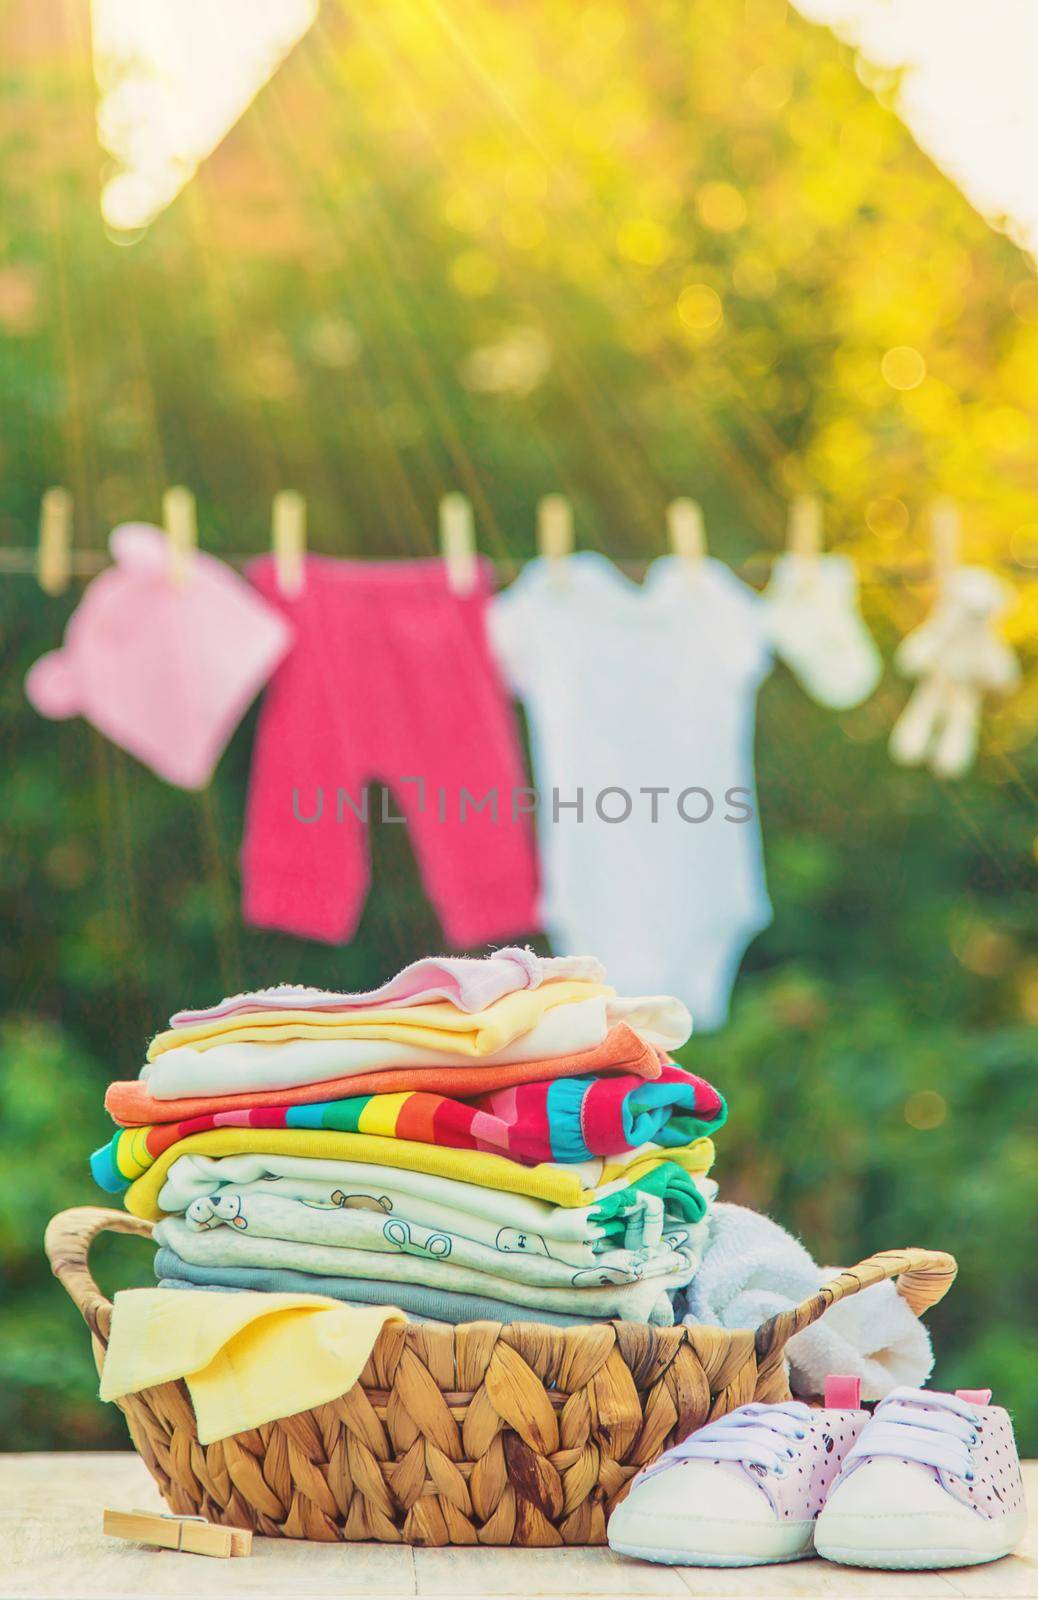 washing baby clothes. Linen dries in the fresh air. Selective focus. by yanadjana